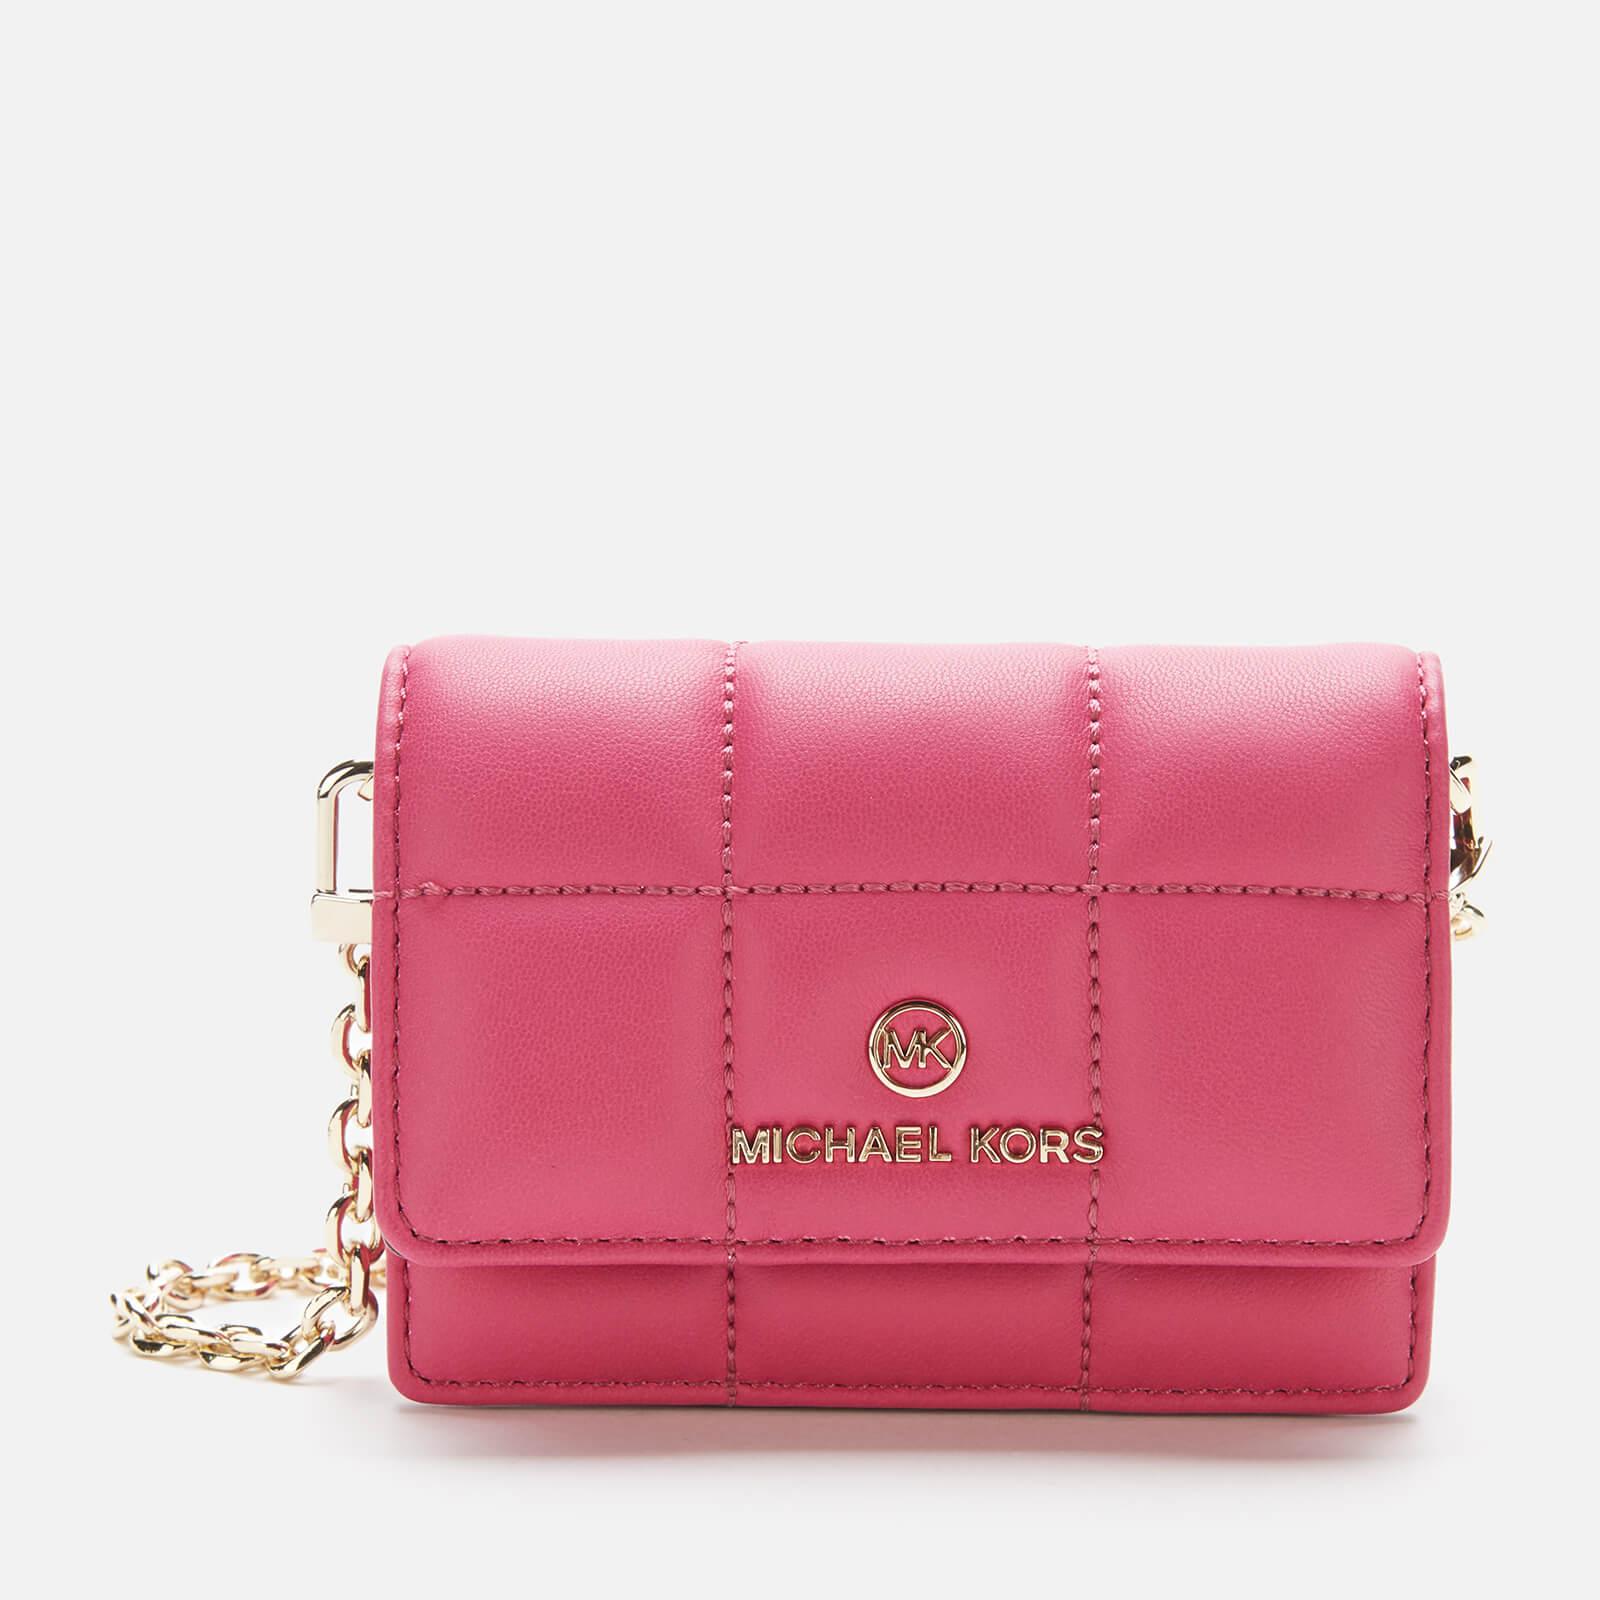 Michael Kors Jet Set Travel Metallic Hot Pink Gold Chain Pochette Bag Purse  - $107 New With Tags - From Shana